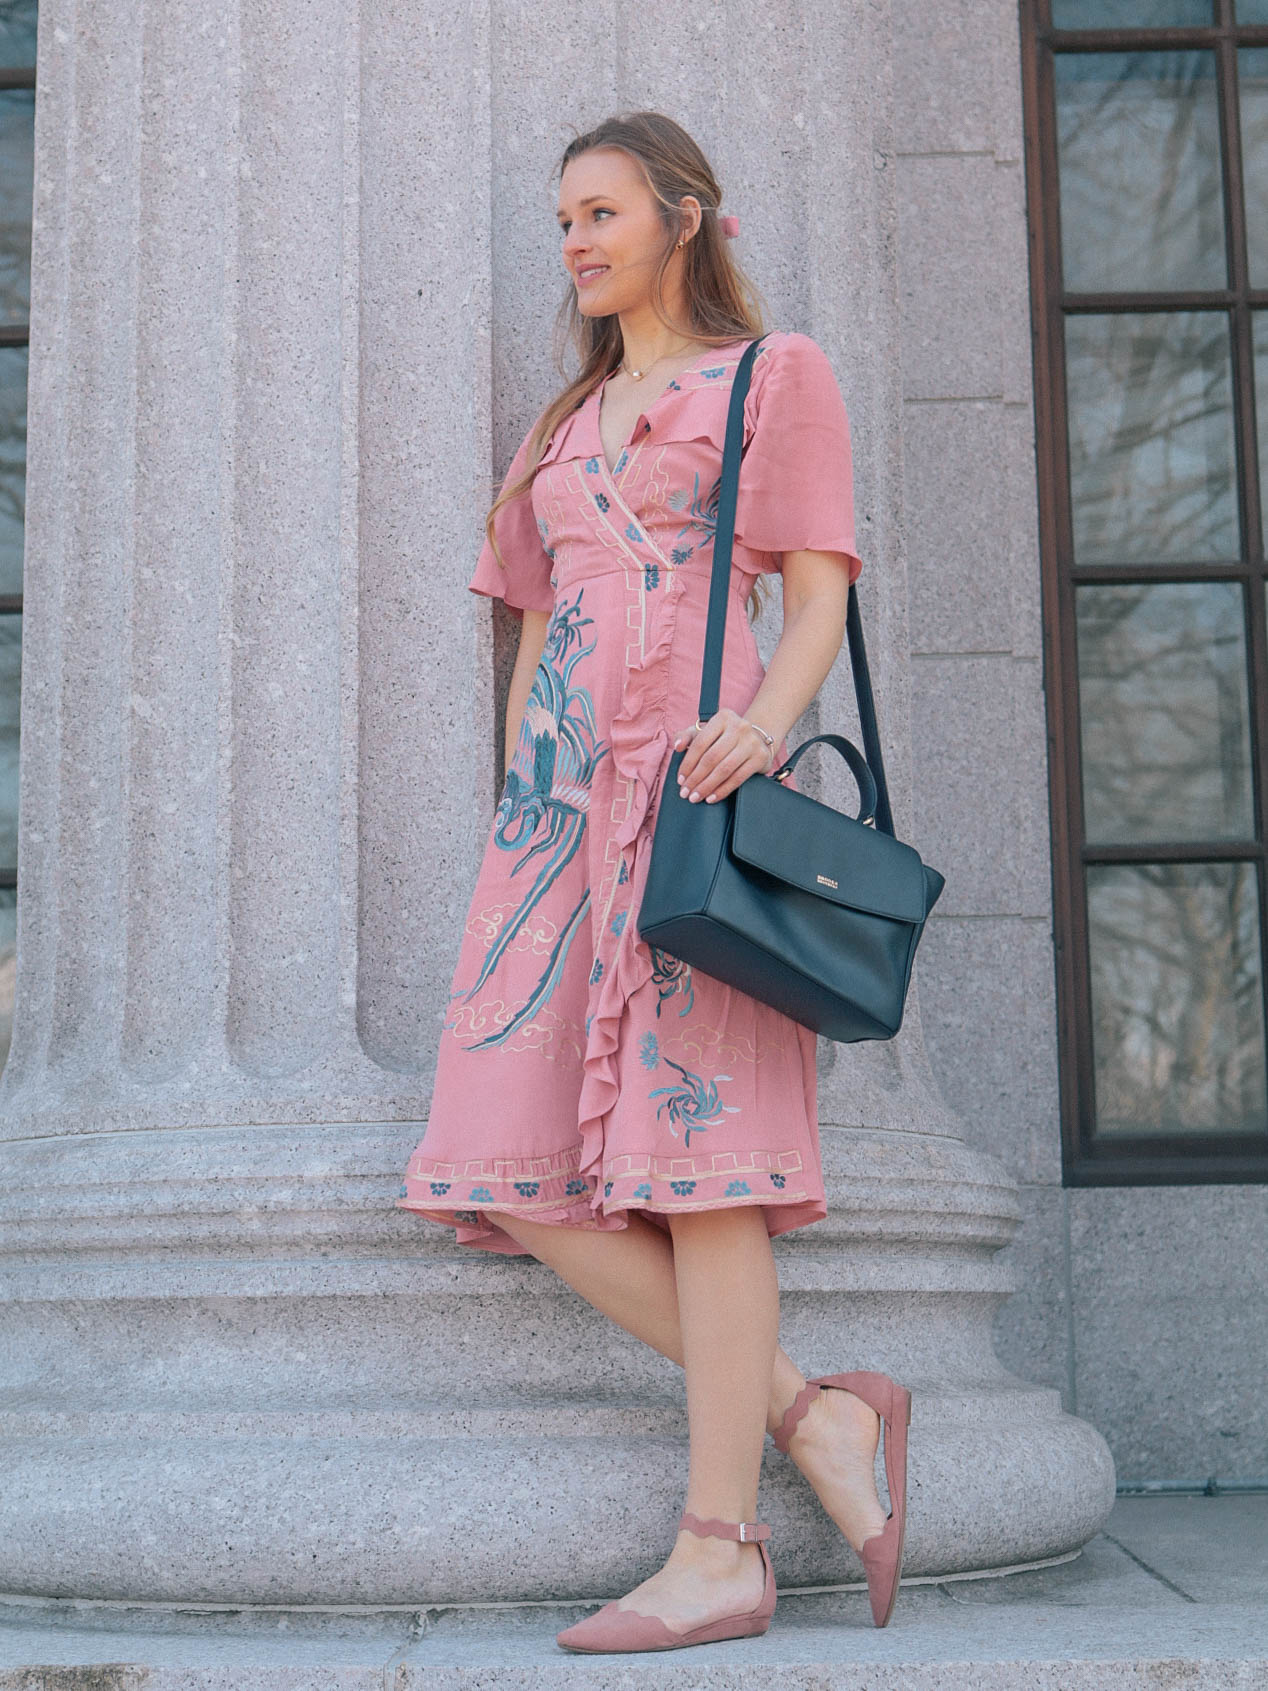 Leigha Gardner on choosing spring outfits based on less than ideal weather, personal style, and reasonable price points